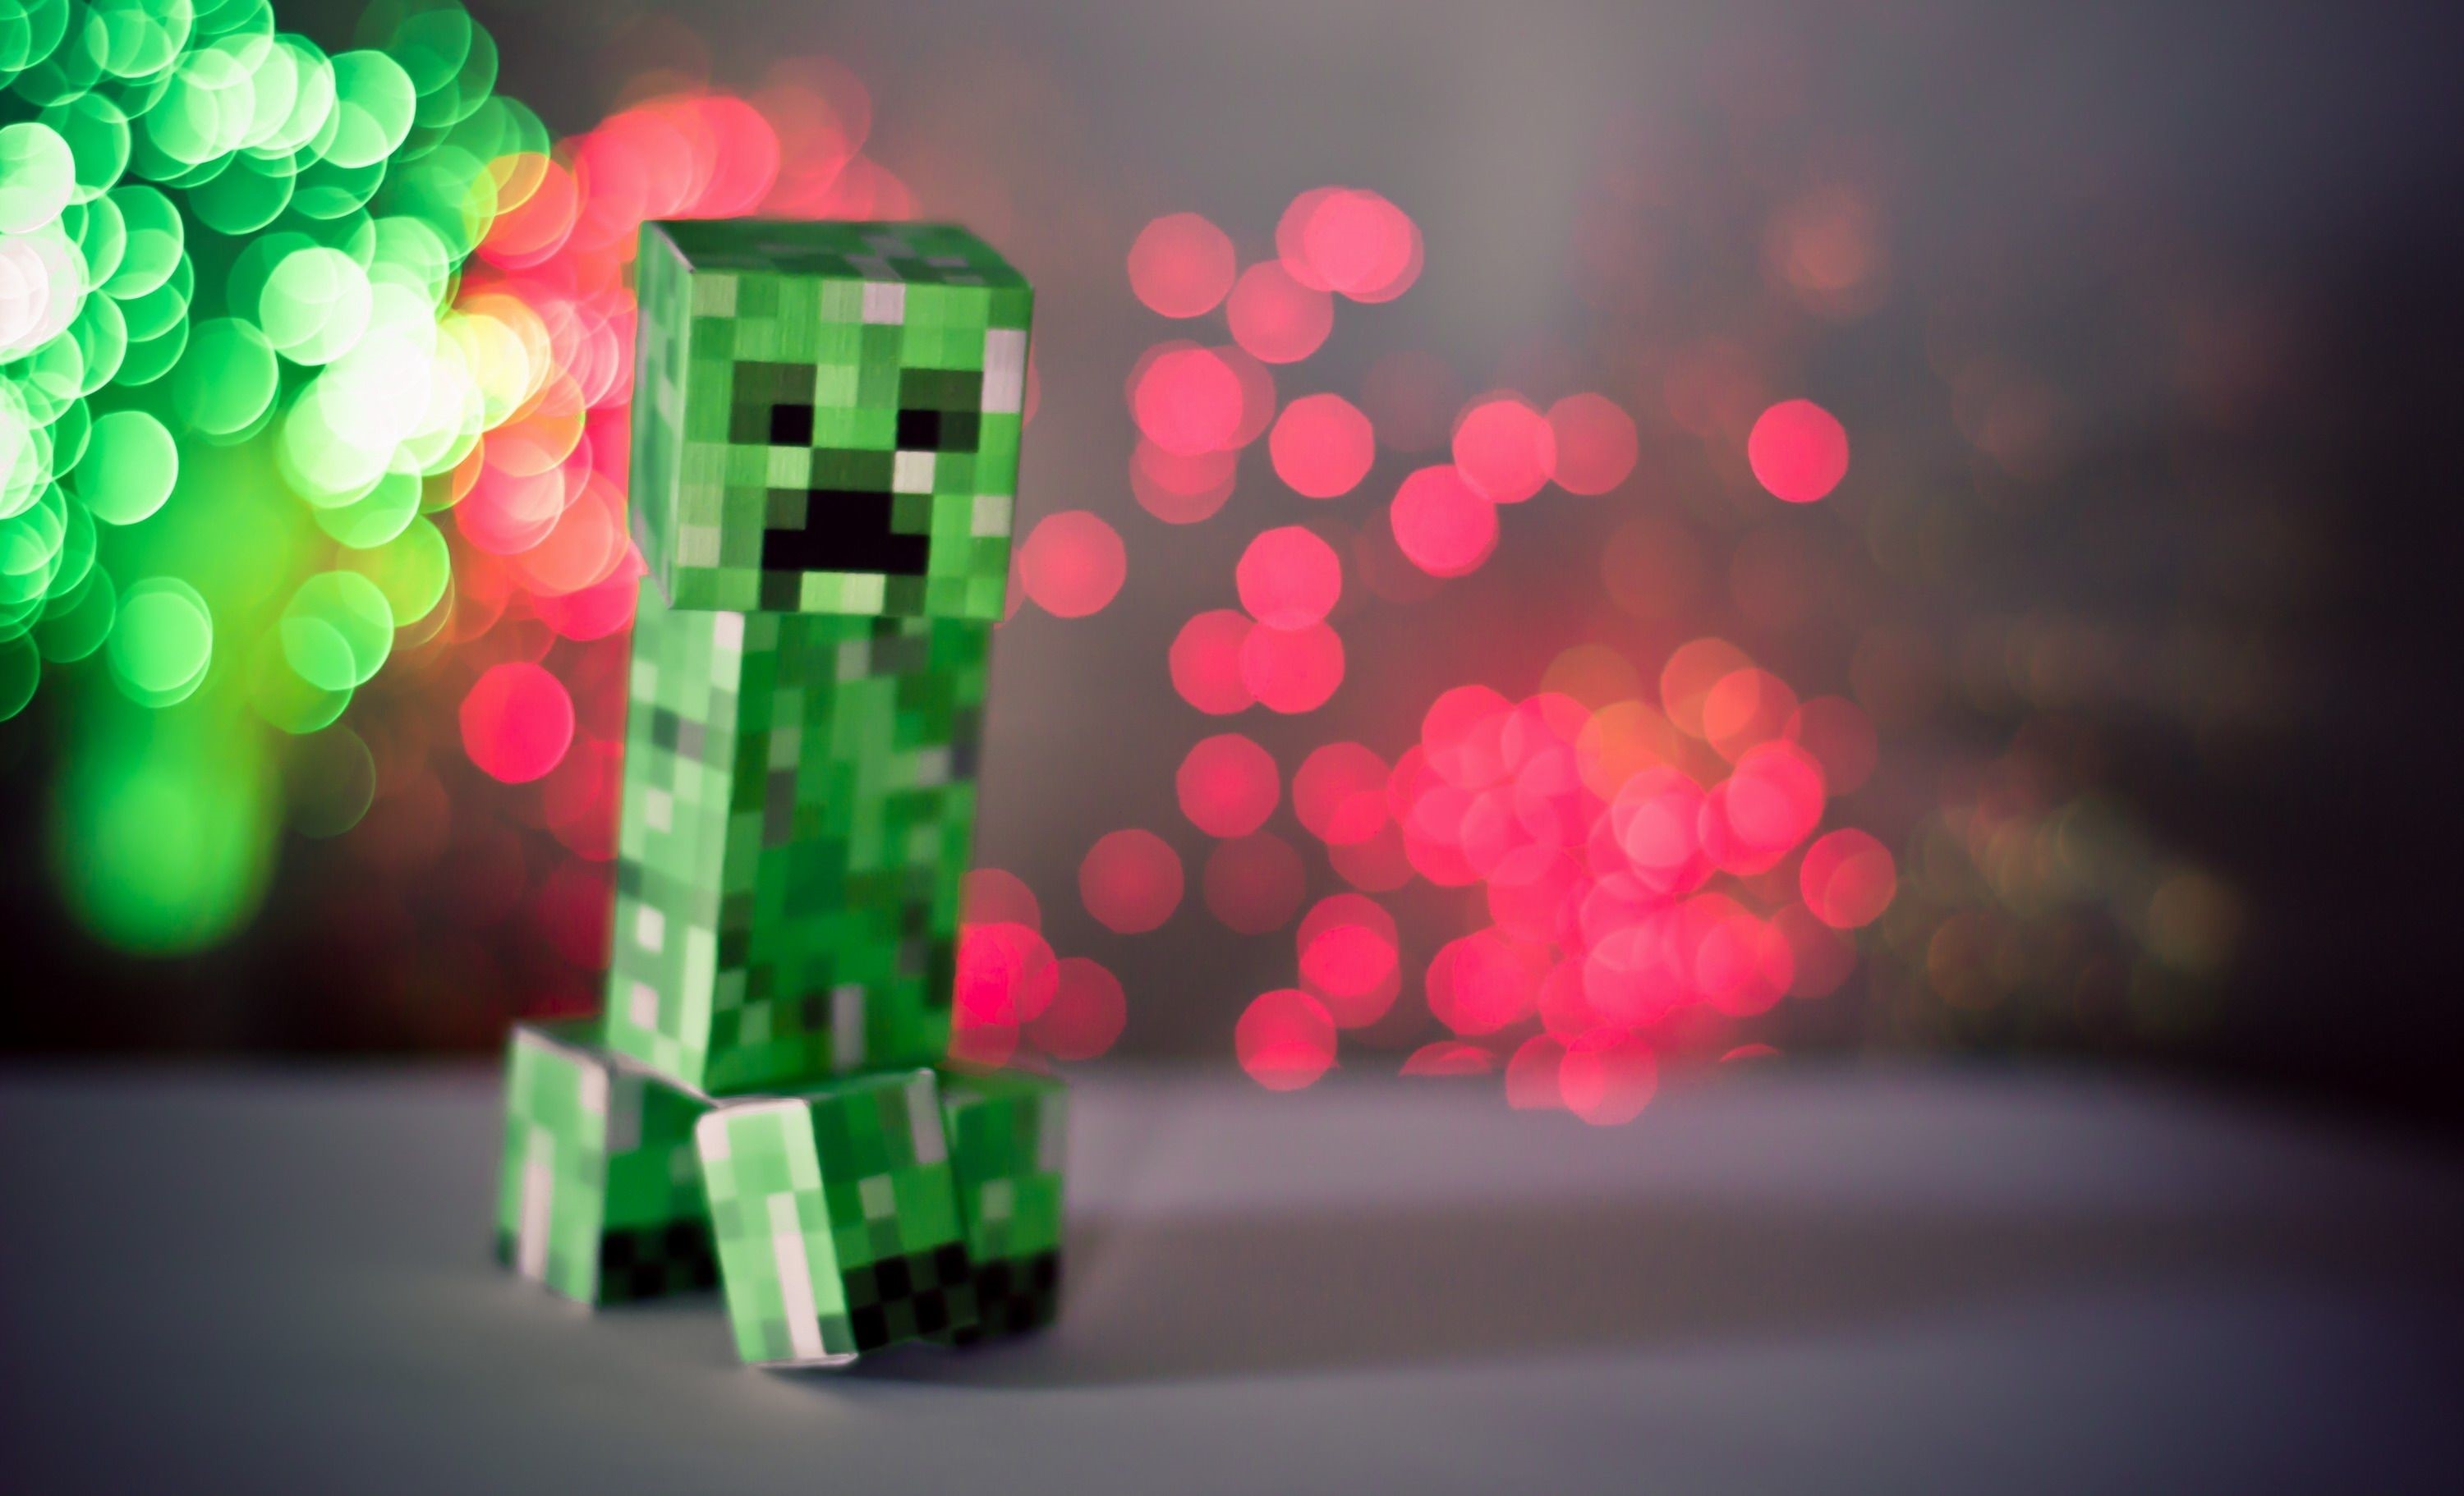 3000x1822 ... 040433c3104c1c61973724300a064987 Cool Minecraft Wallpapers SVMVtYp ...